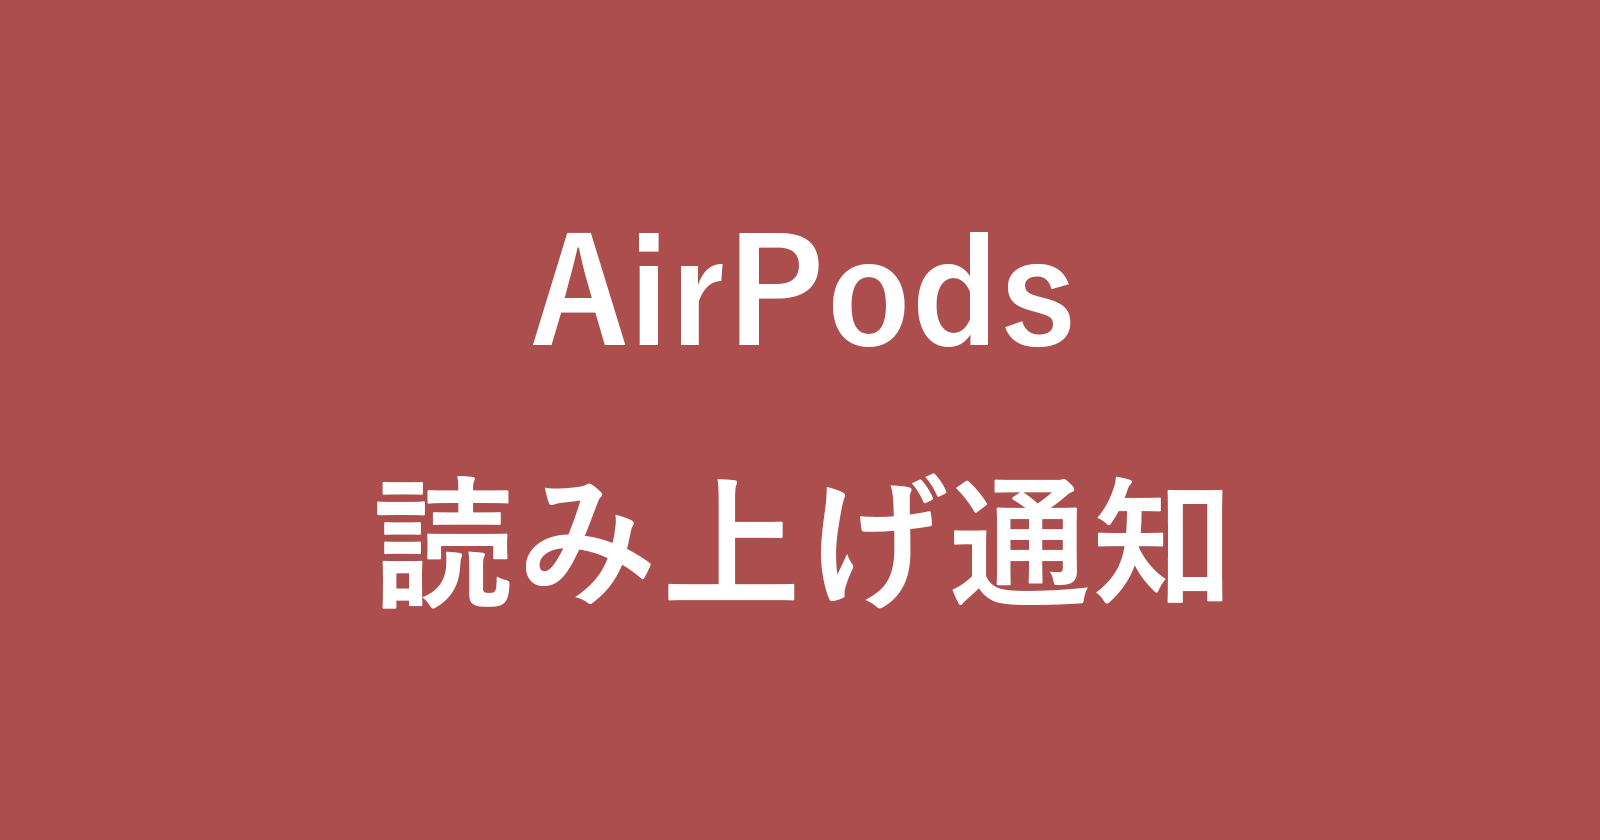 airpods announce notification